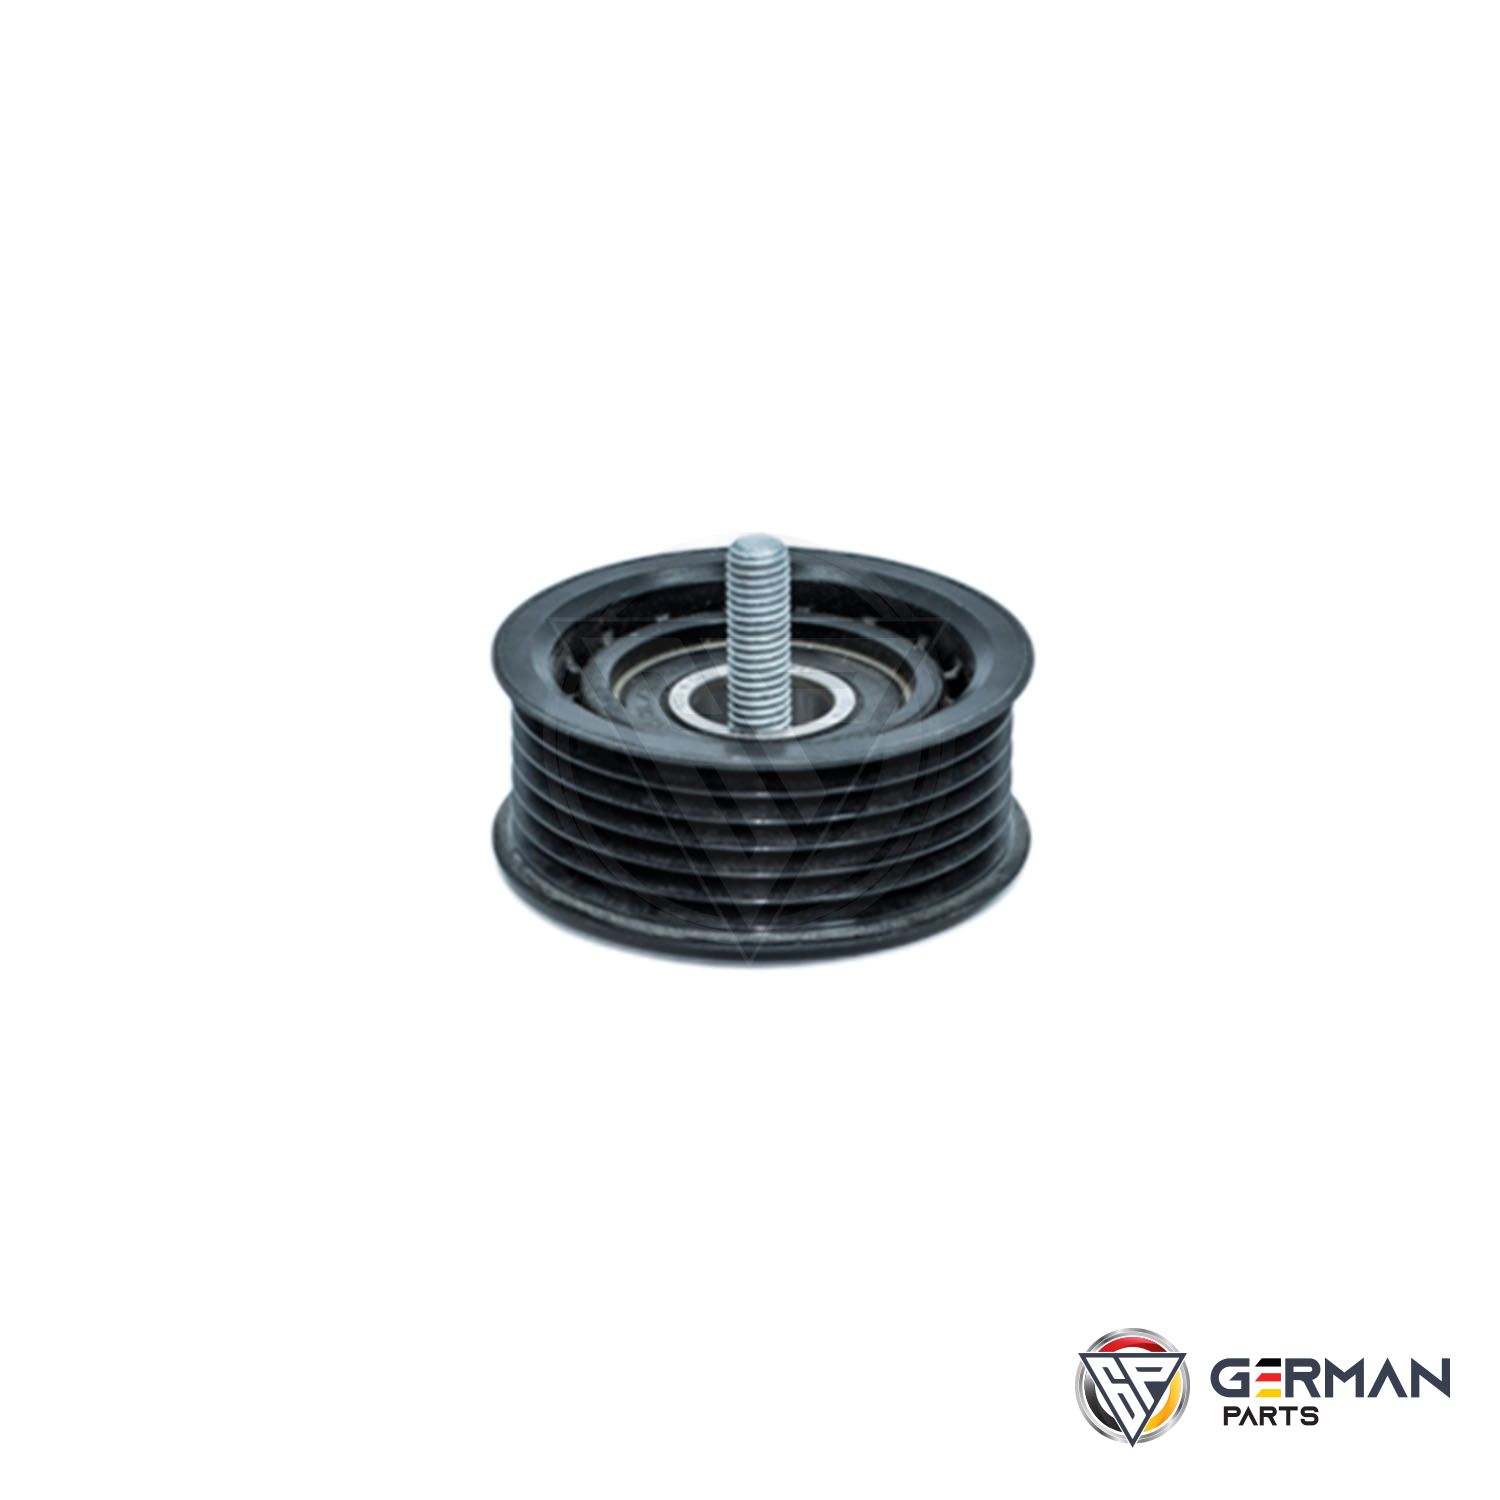 Buy Mercedes Benz Sheave Pulley 1562020619 - German Parts